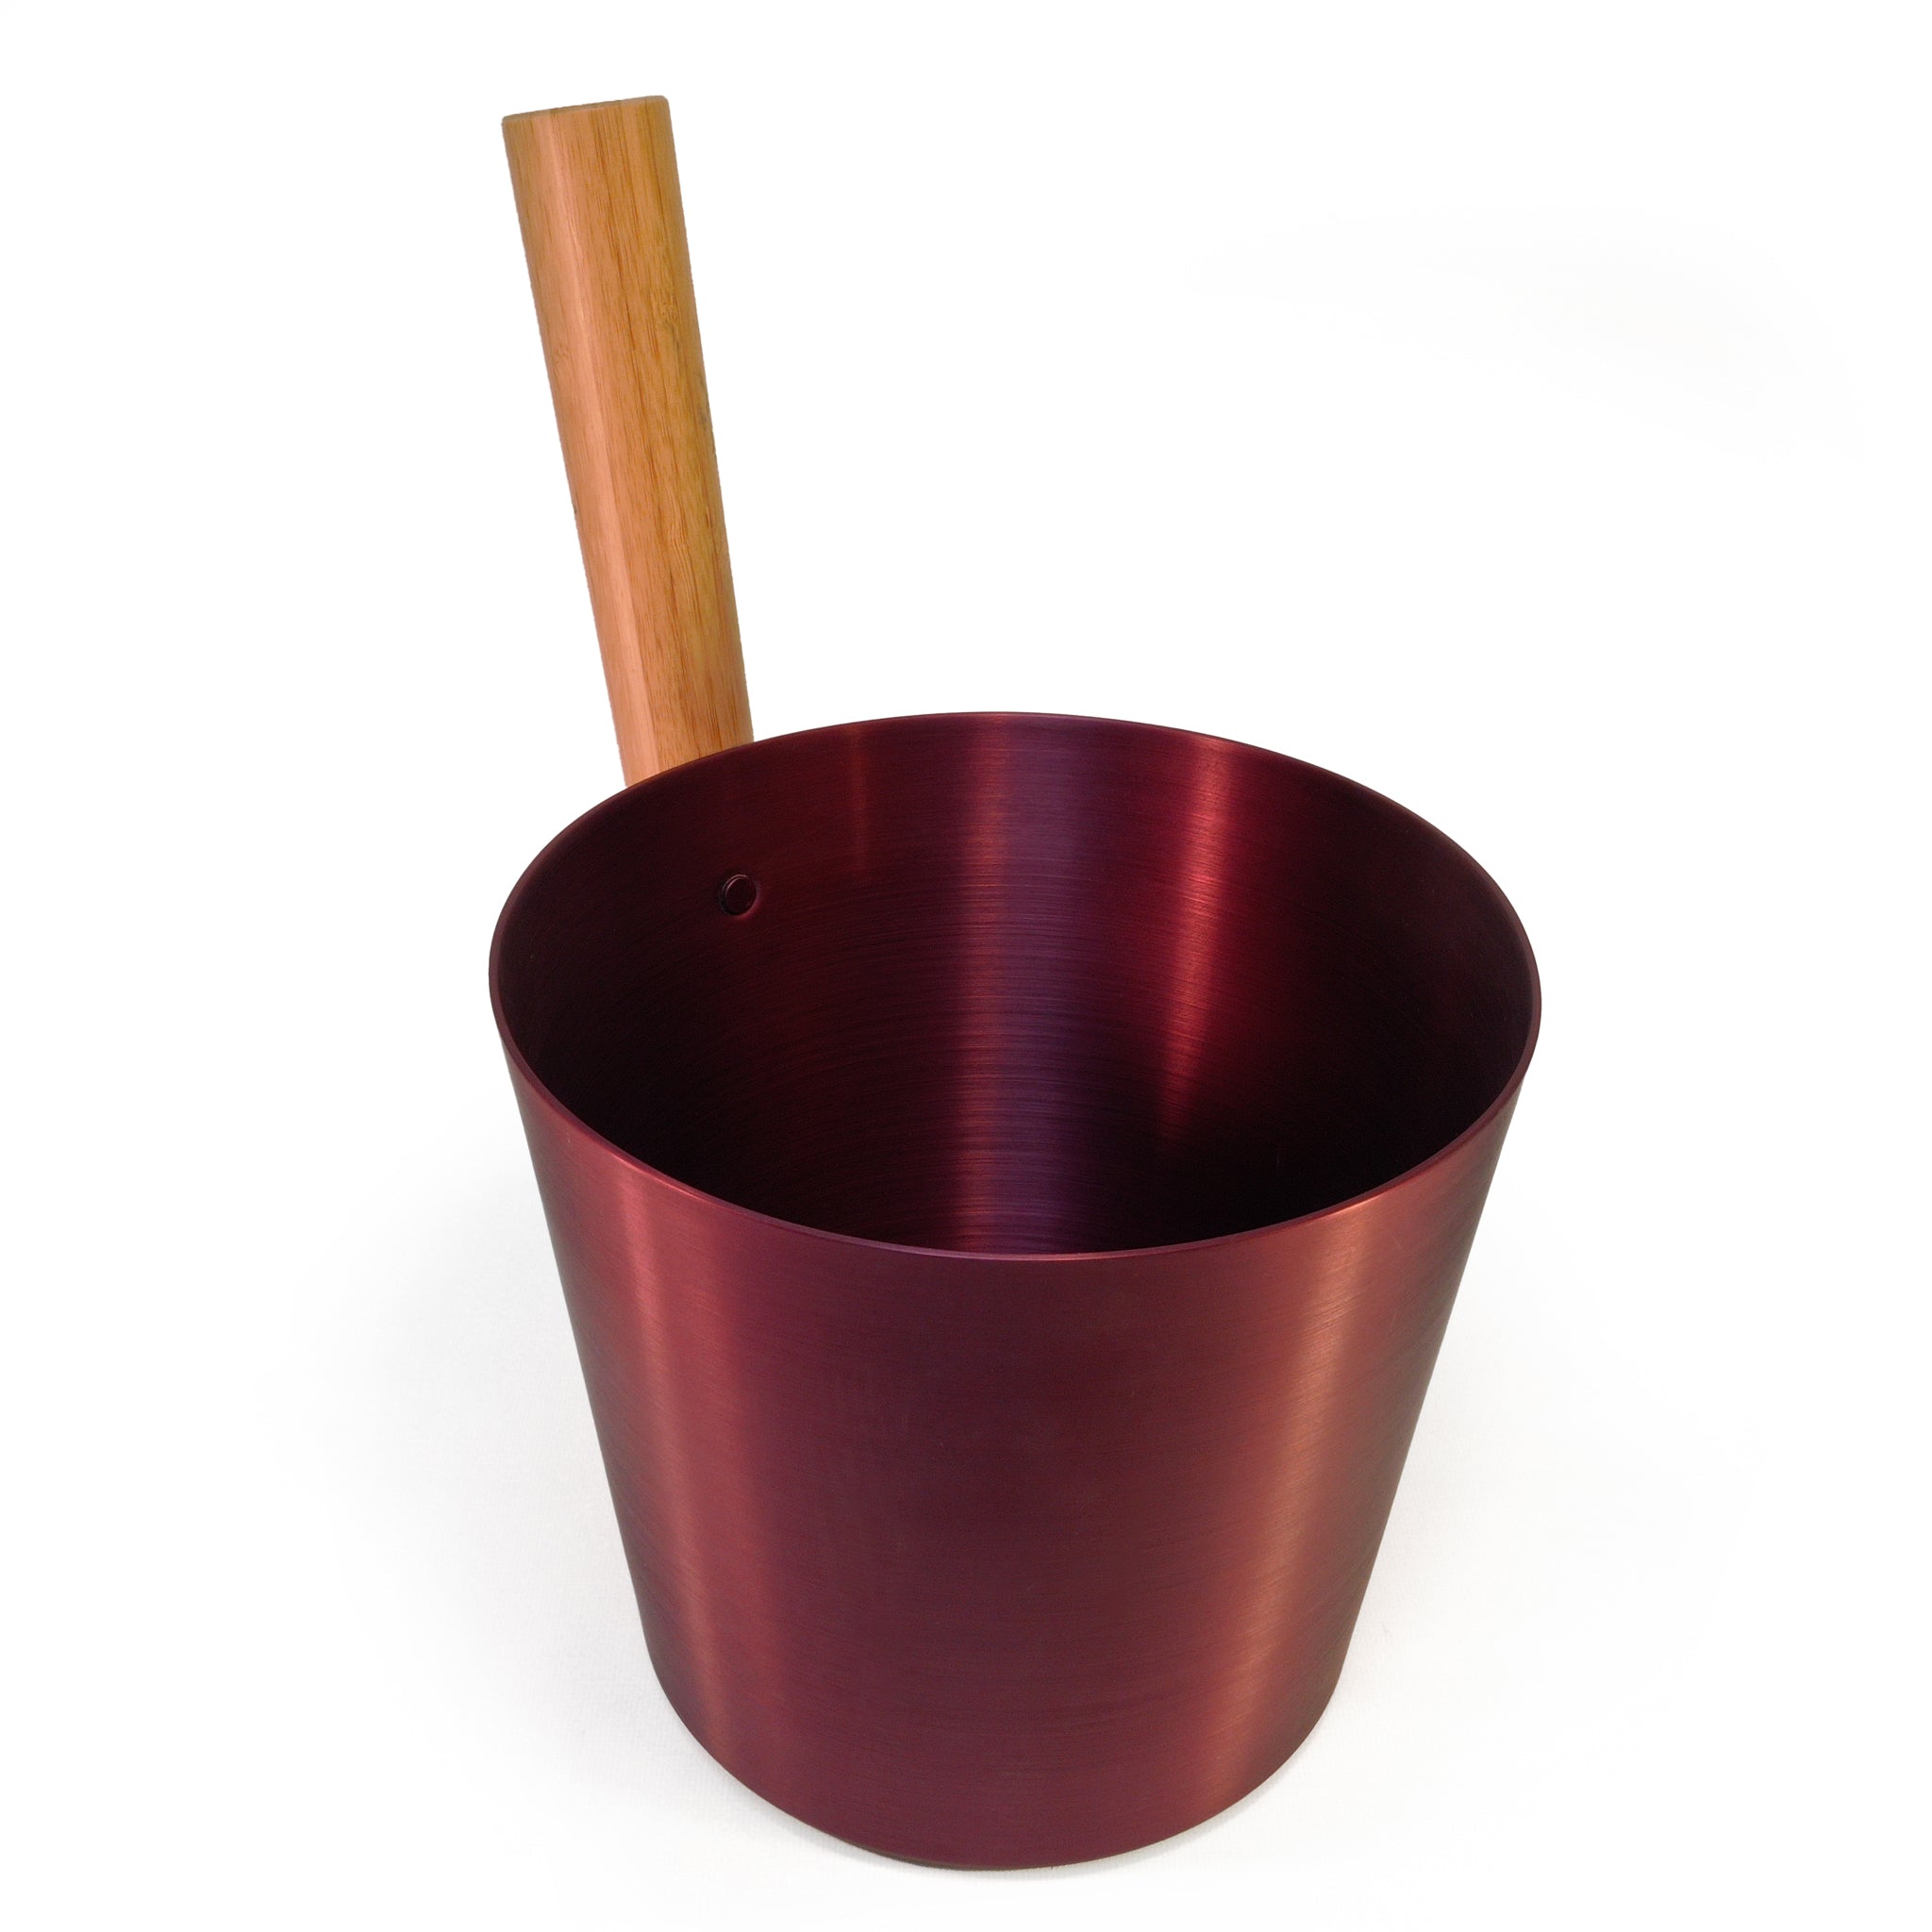 Cranberry colored Brushed Aluminum Sauna bucket with straight wooden handle on white background